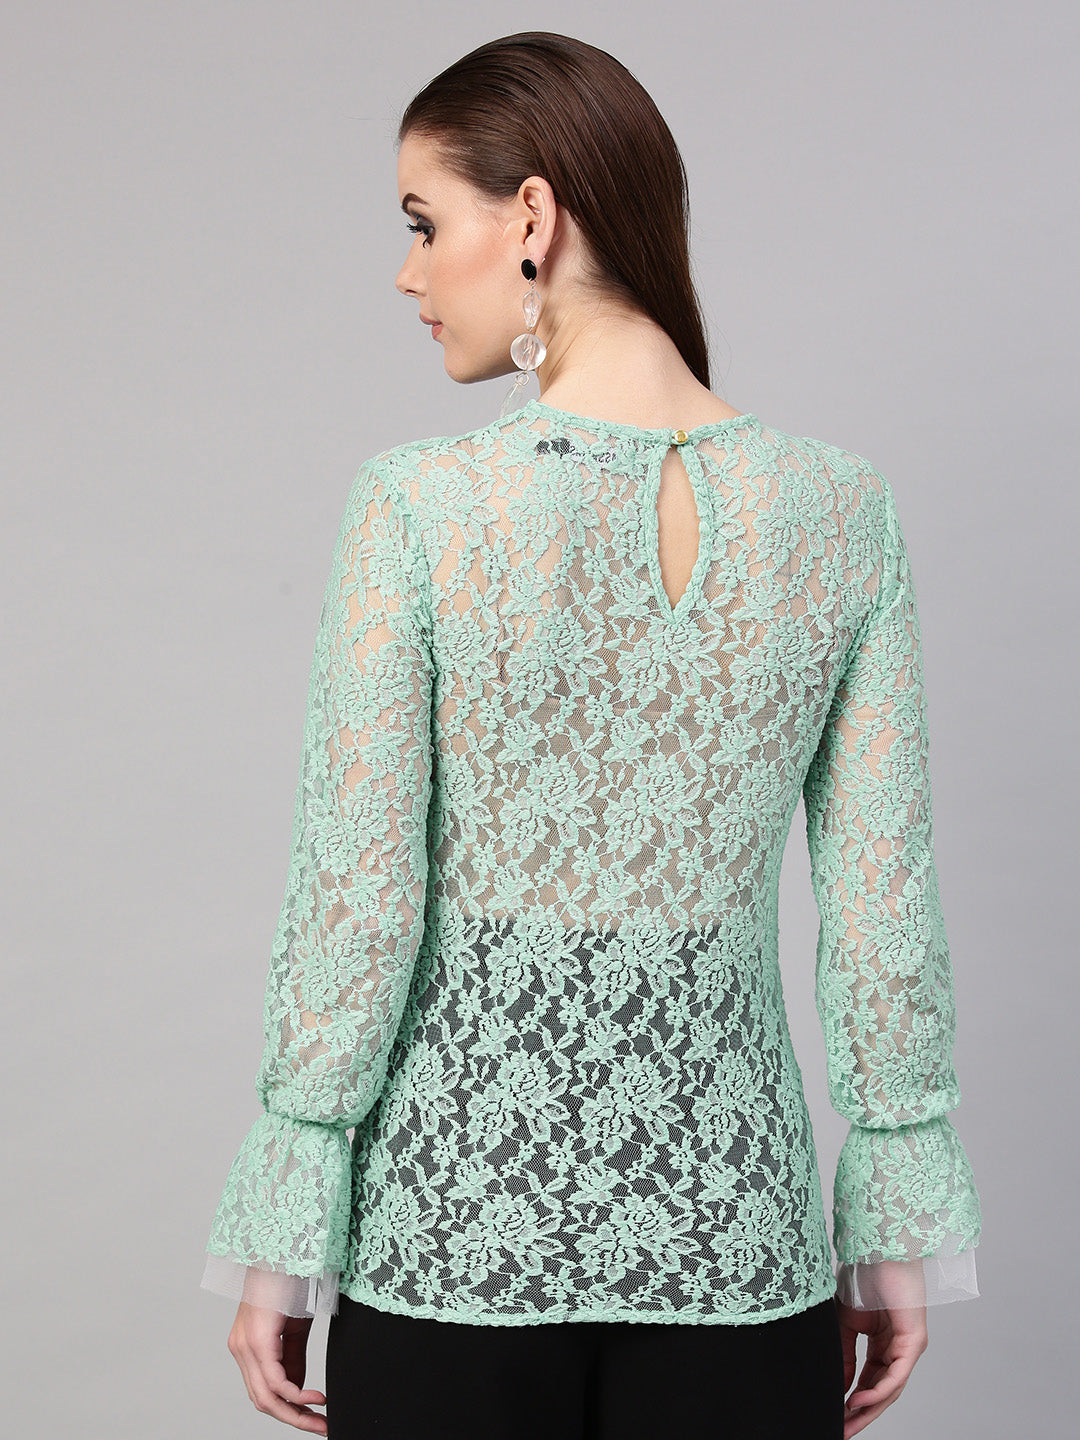 Mint Blue Full Sleeves Lace Blouse